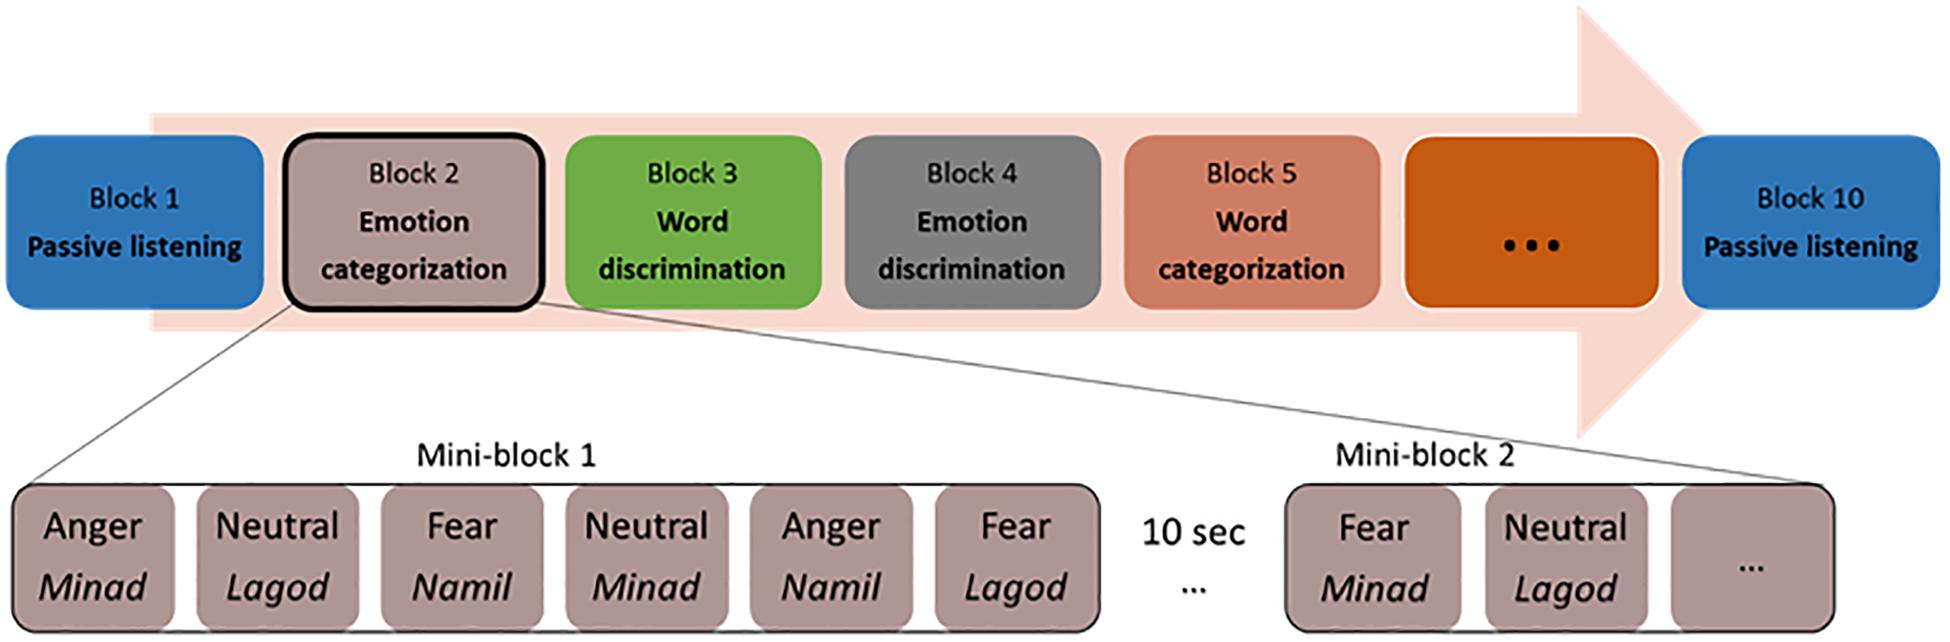 Frontiers Human Discrimination And Categorization Of Emotions In Voices A Functional Near Infrared Spectroscopy Fnirs Study Neuroscience